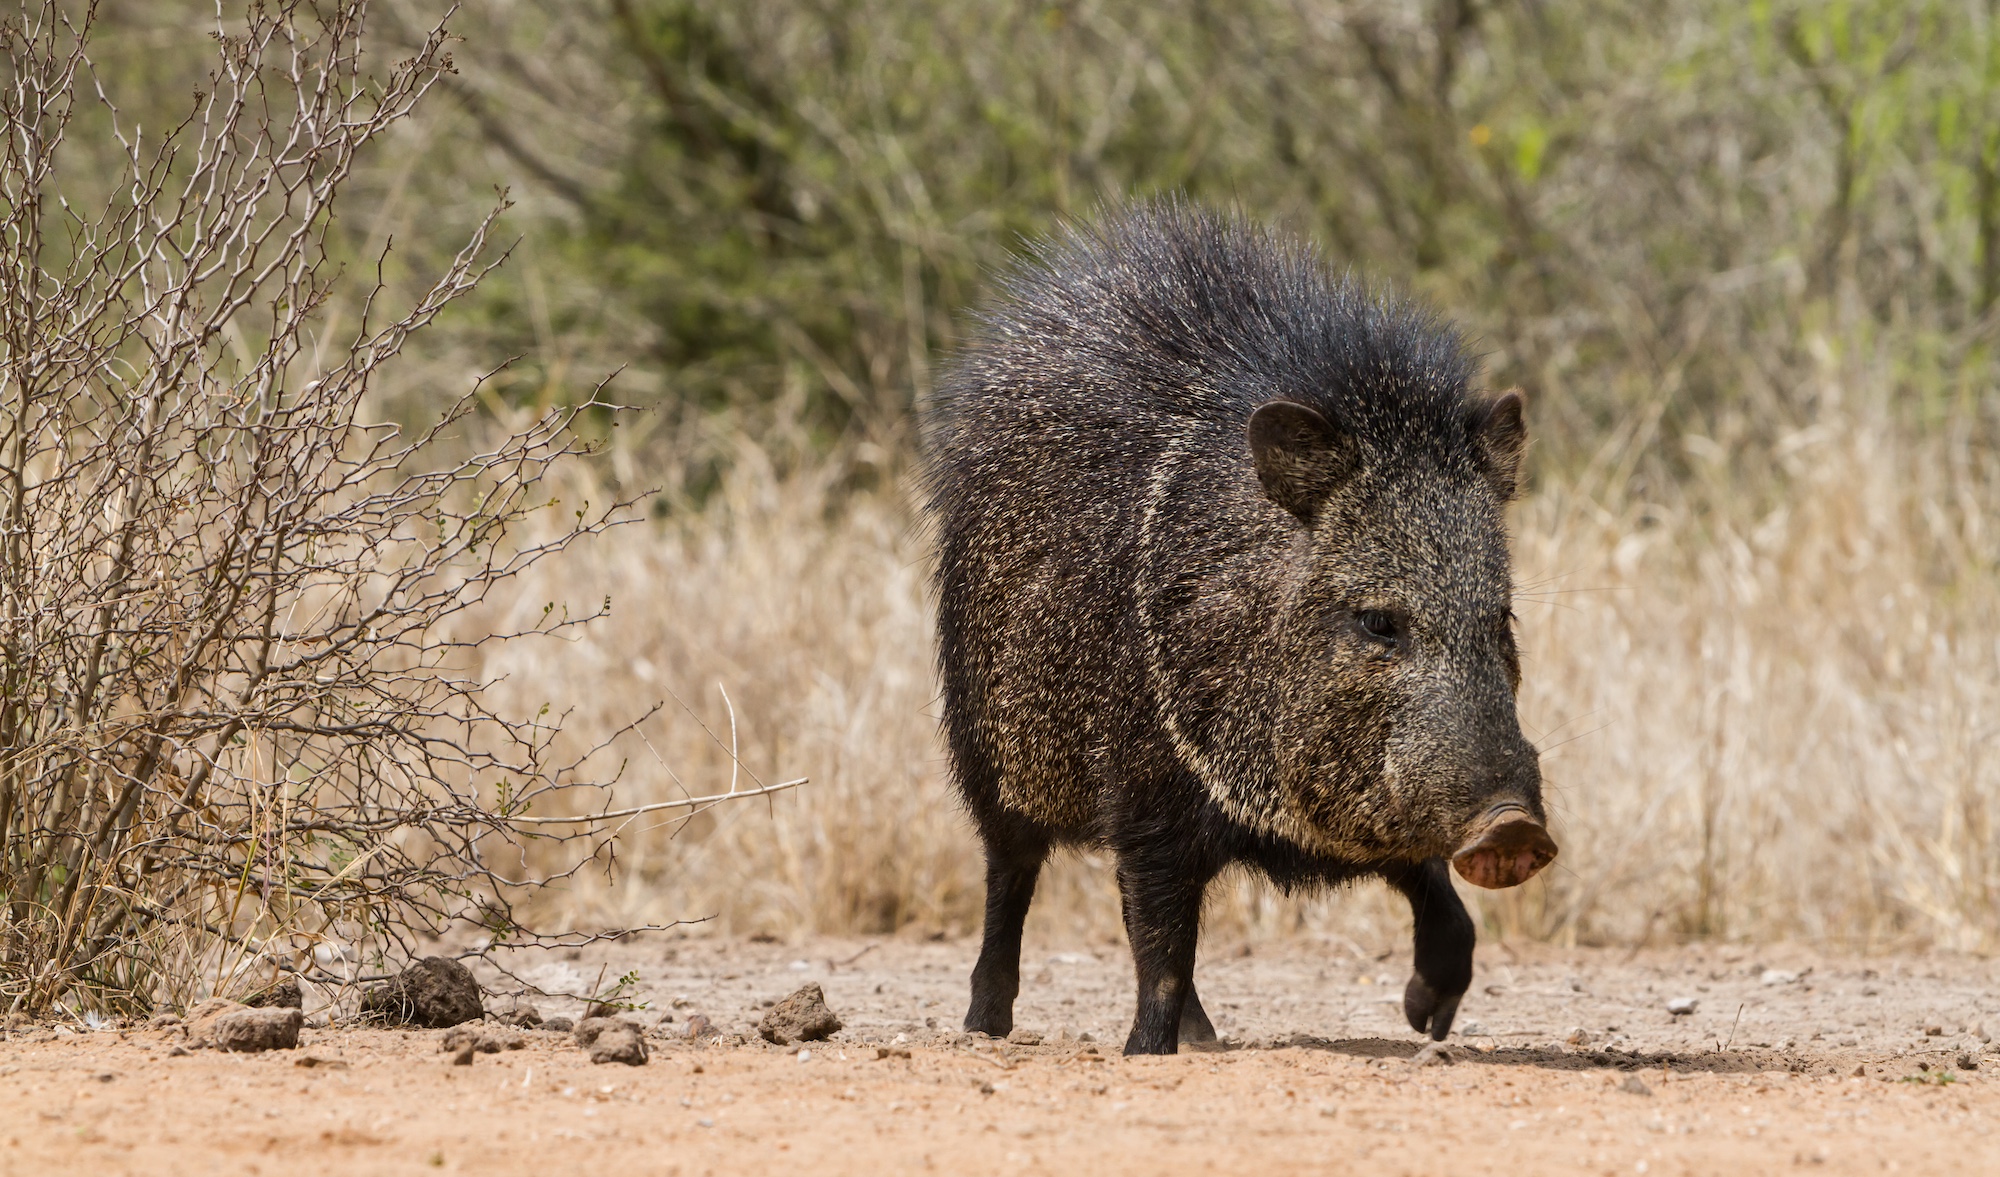 Collared Peccary or Javelina is widespread through the Southwestern United States and Central and South America. It is not a member of the pig family, despite its looks.